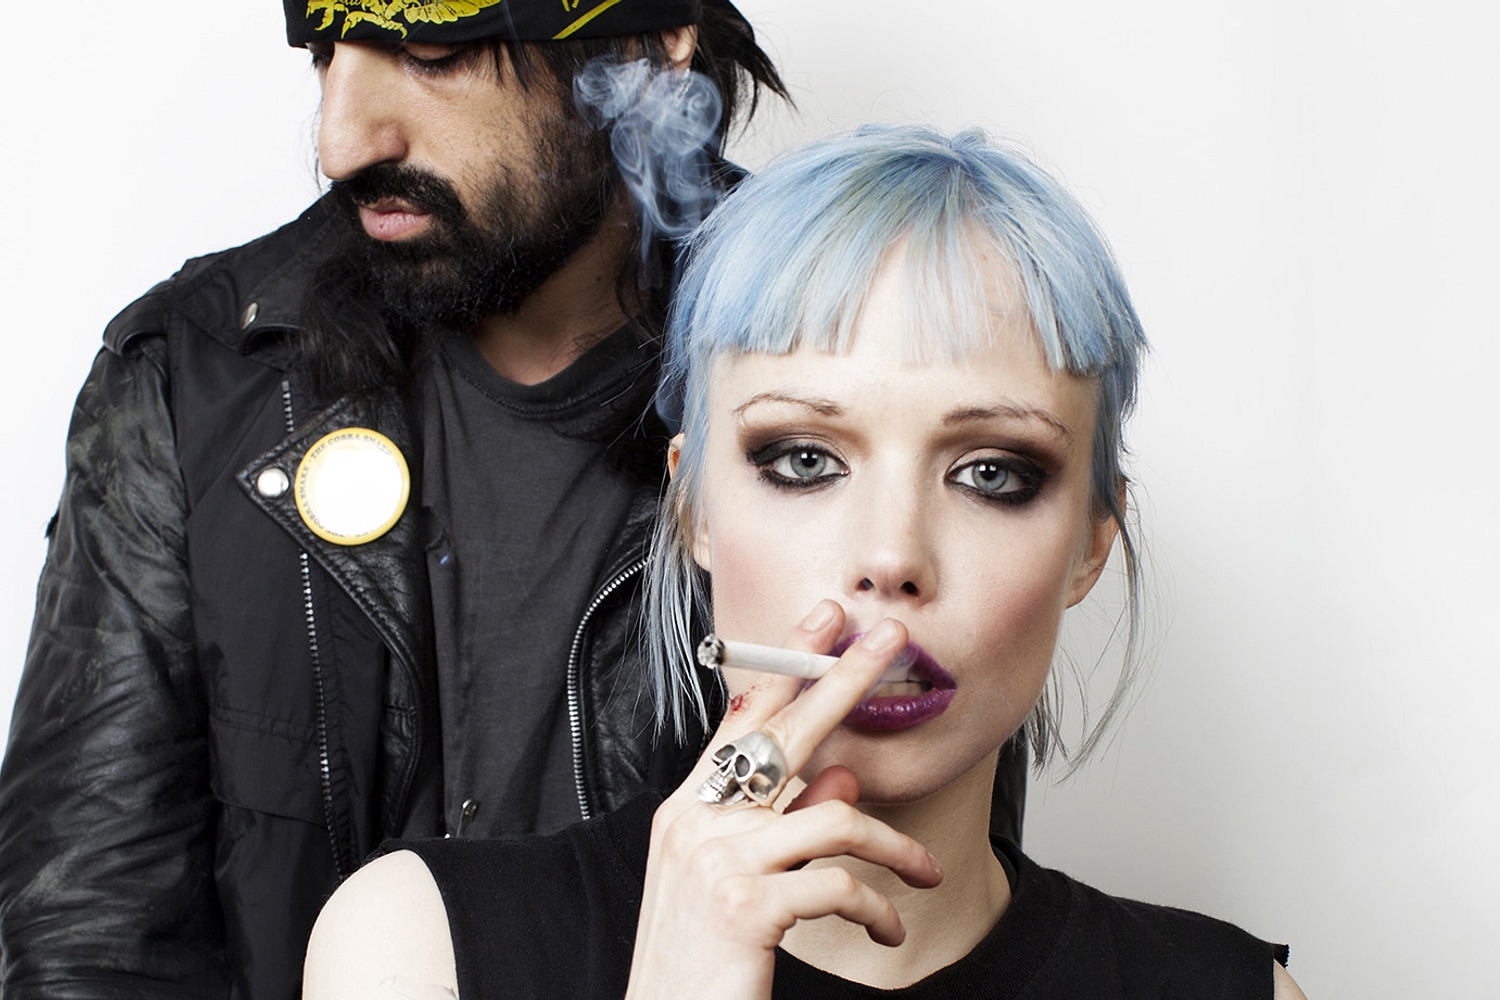 Crystal Castles: The defining moments of a chaotic band